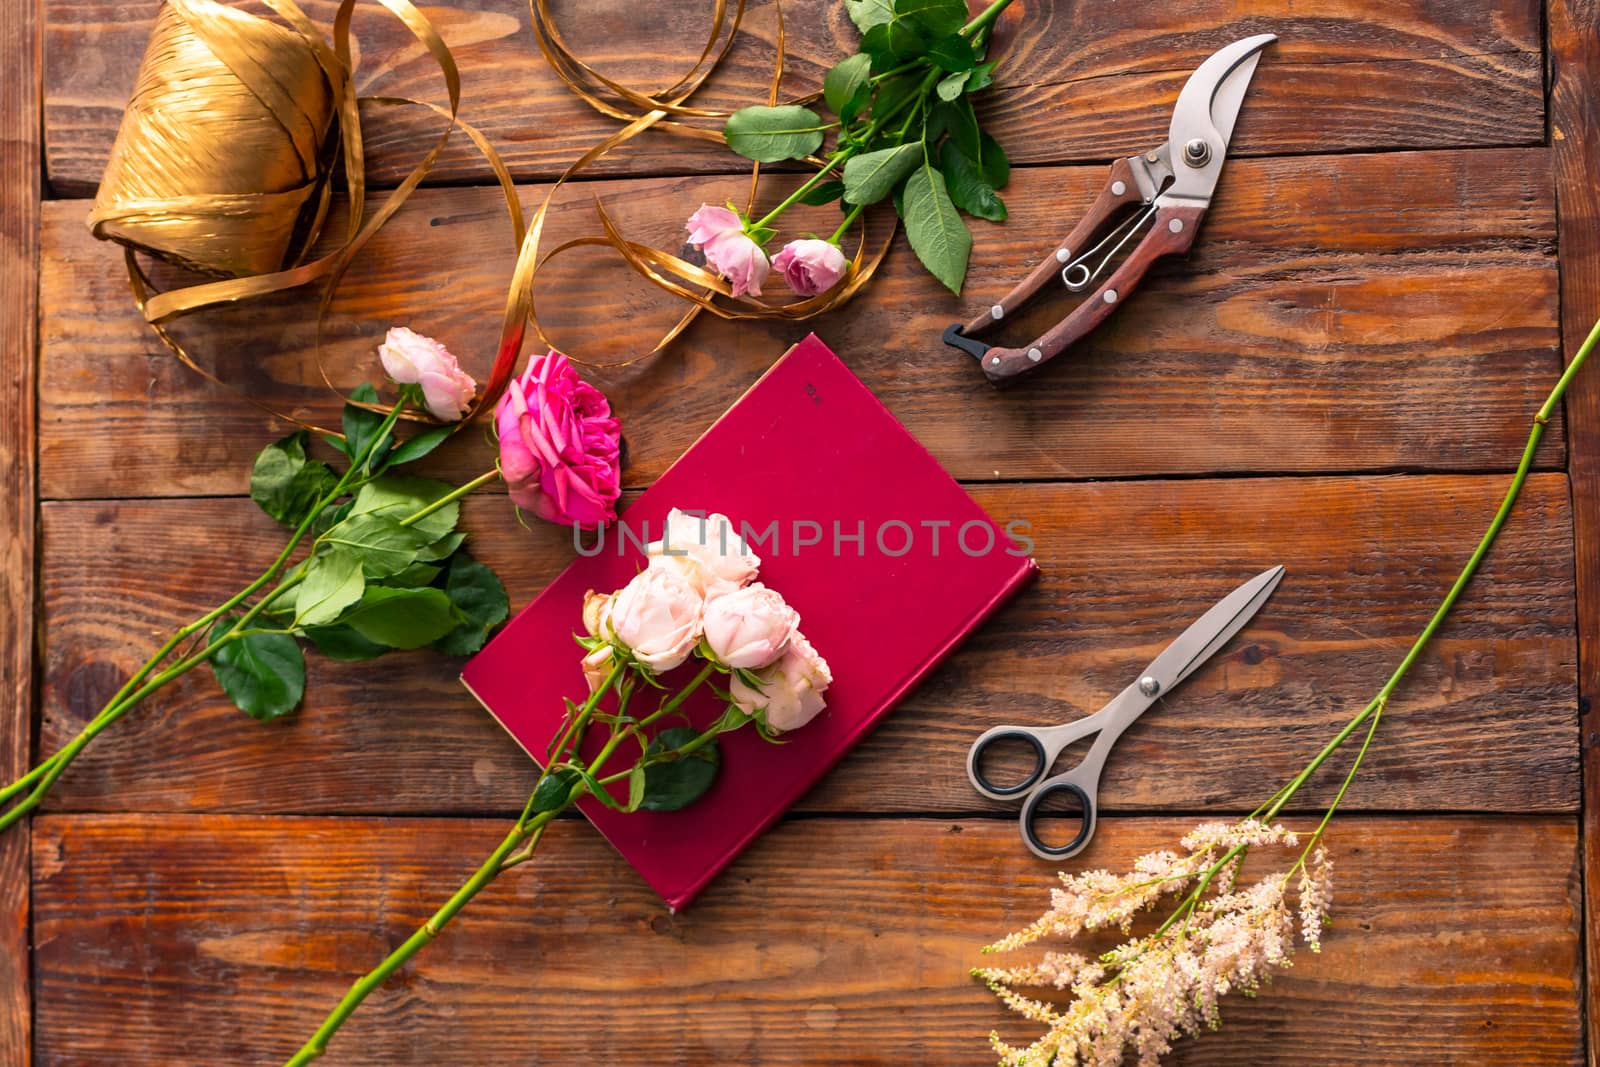 The workplace of the florist to work. Top view. Making floral decorations. Flowers on a old wooden table. Tools and accessories florists need for making up a bouquet. by rdv27